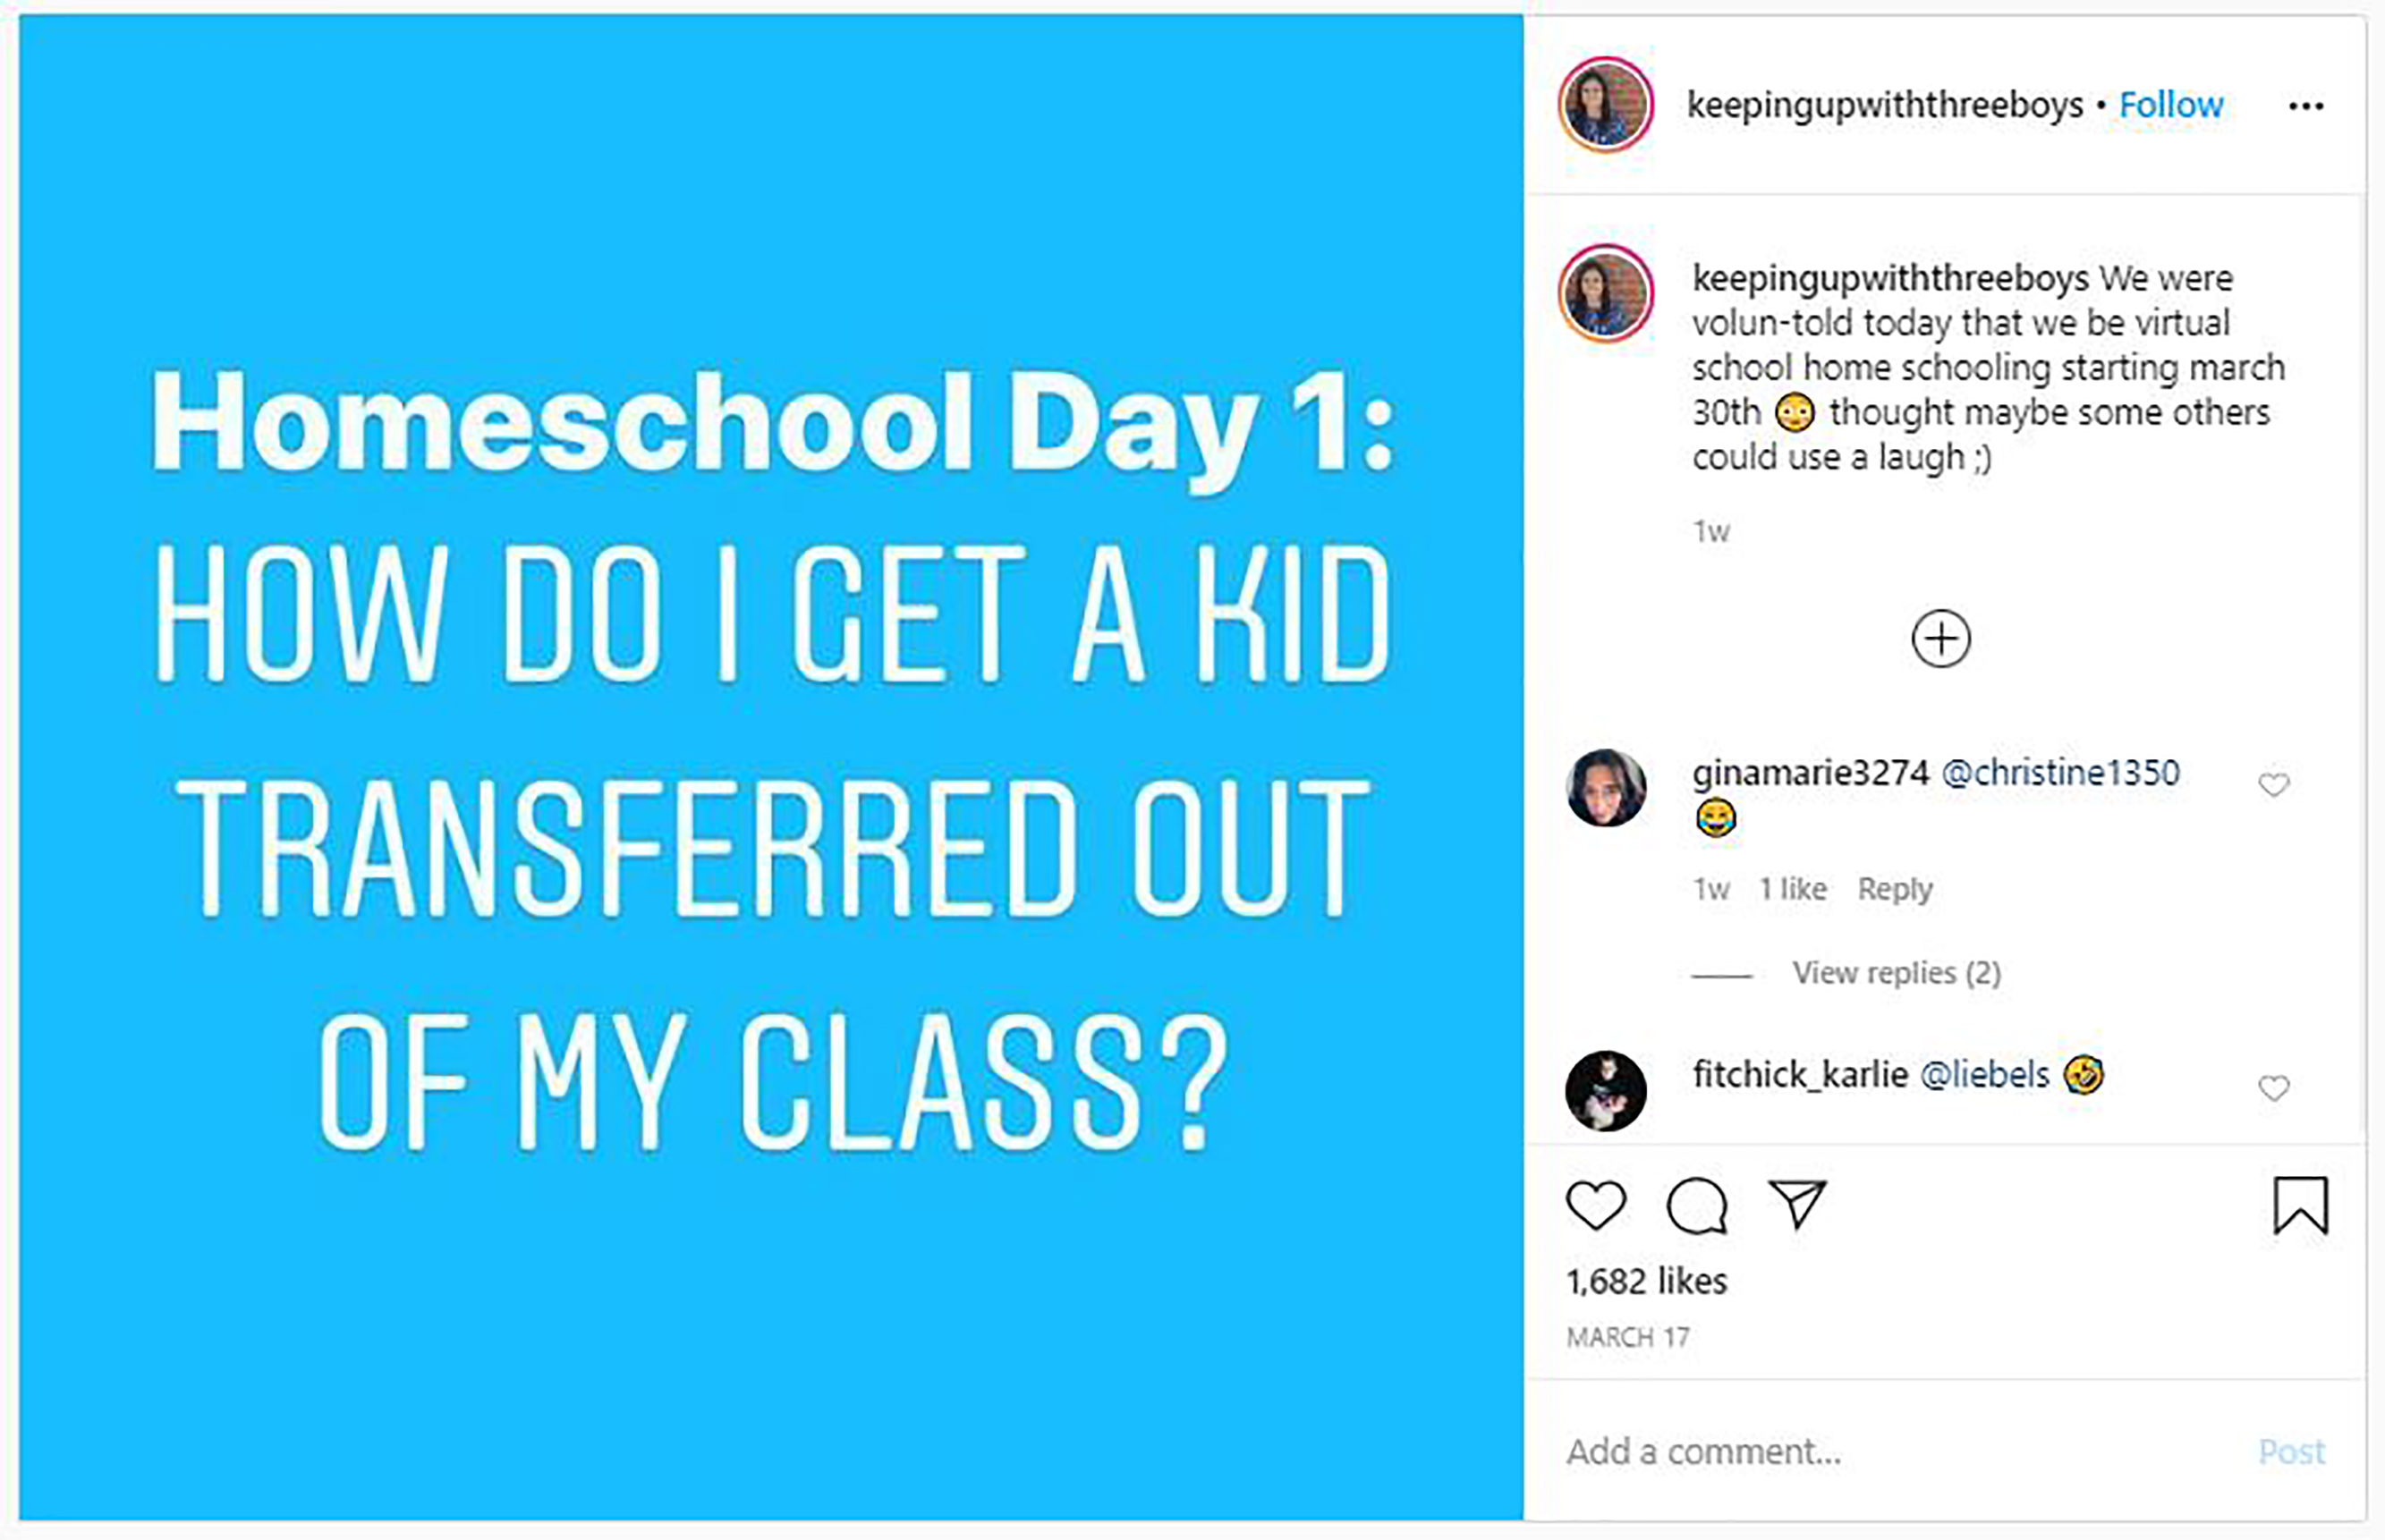 Work from home joke says "Homeschool Day 1: How do i get a kid transferred out of my class?